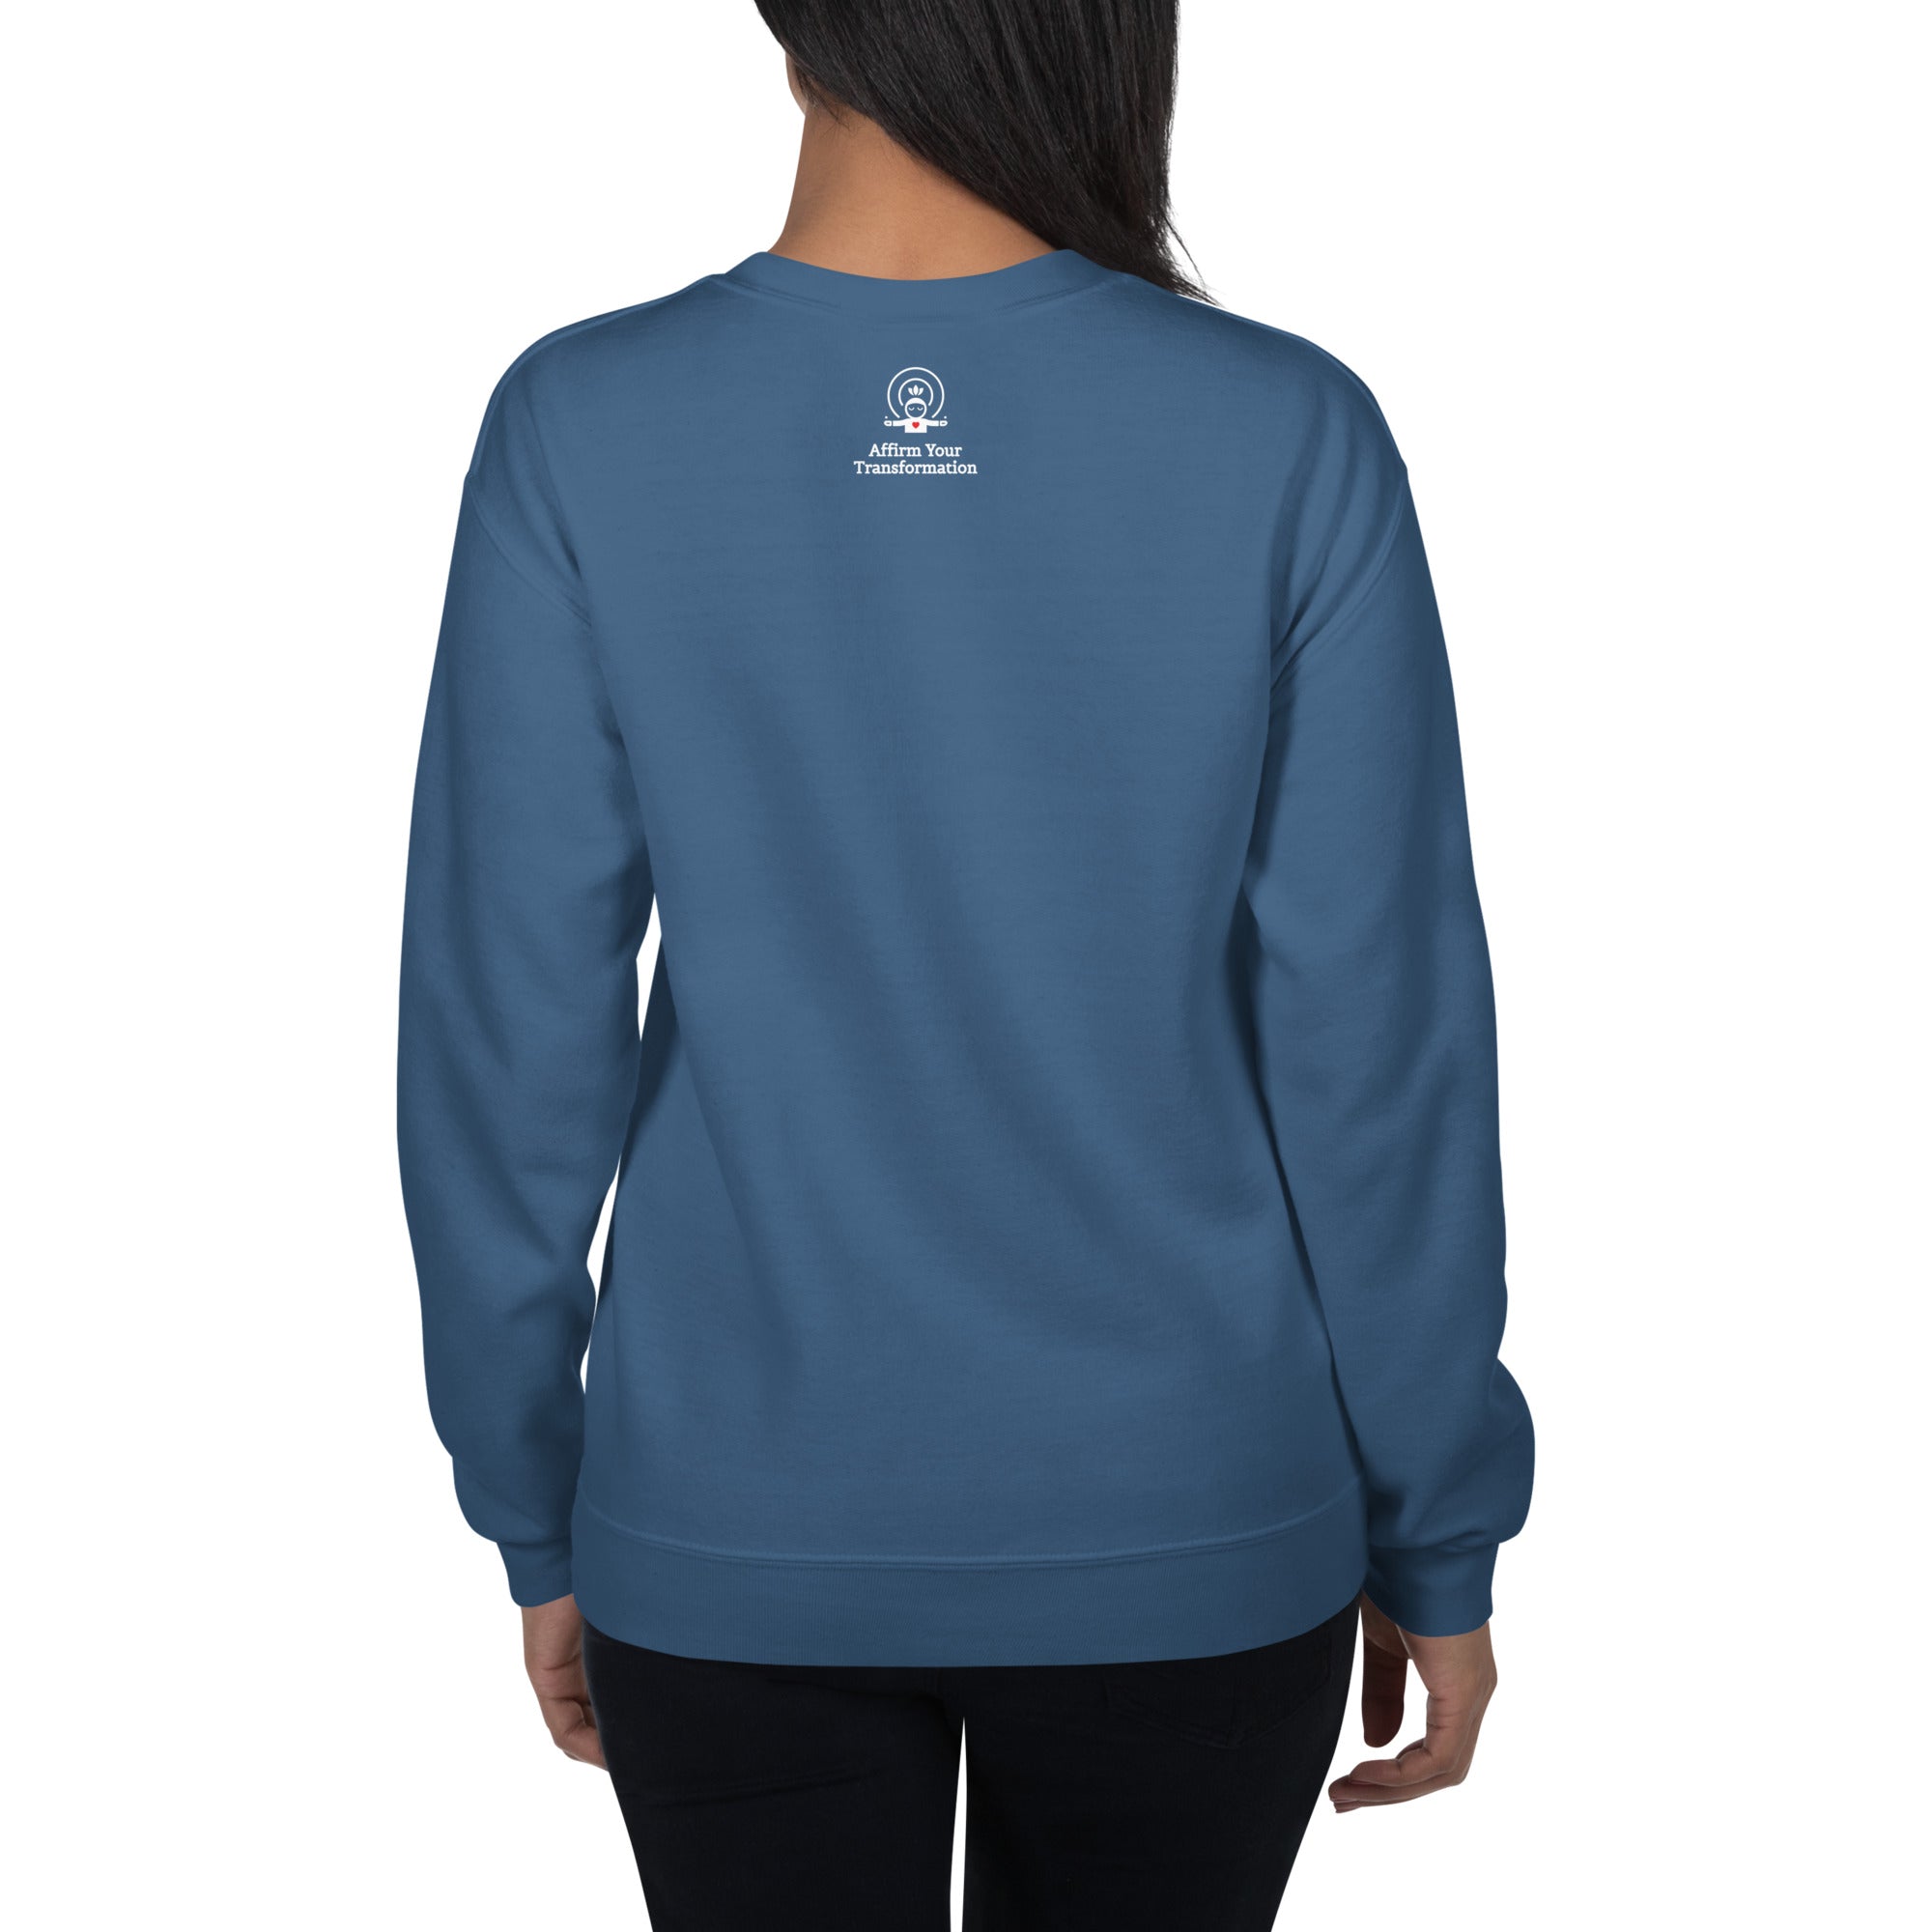 I HONOR MY BODY TEMPLE Mirror Affirmation Sweatshirt (White Text) - 9 COLORS!